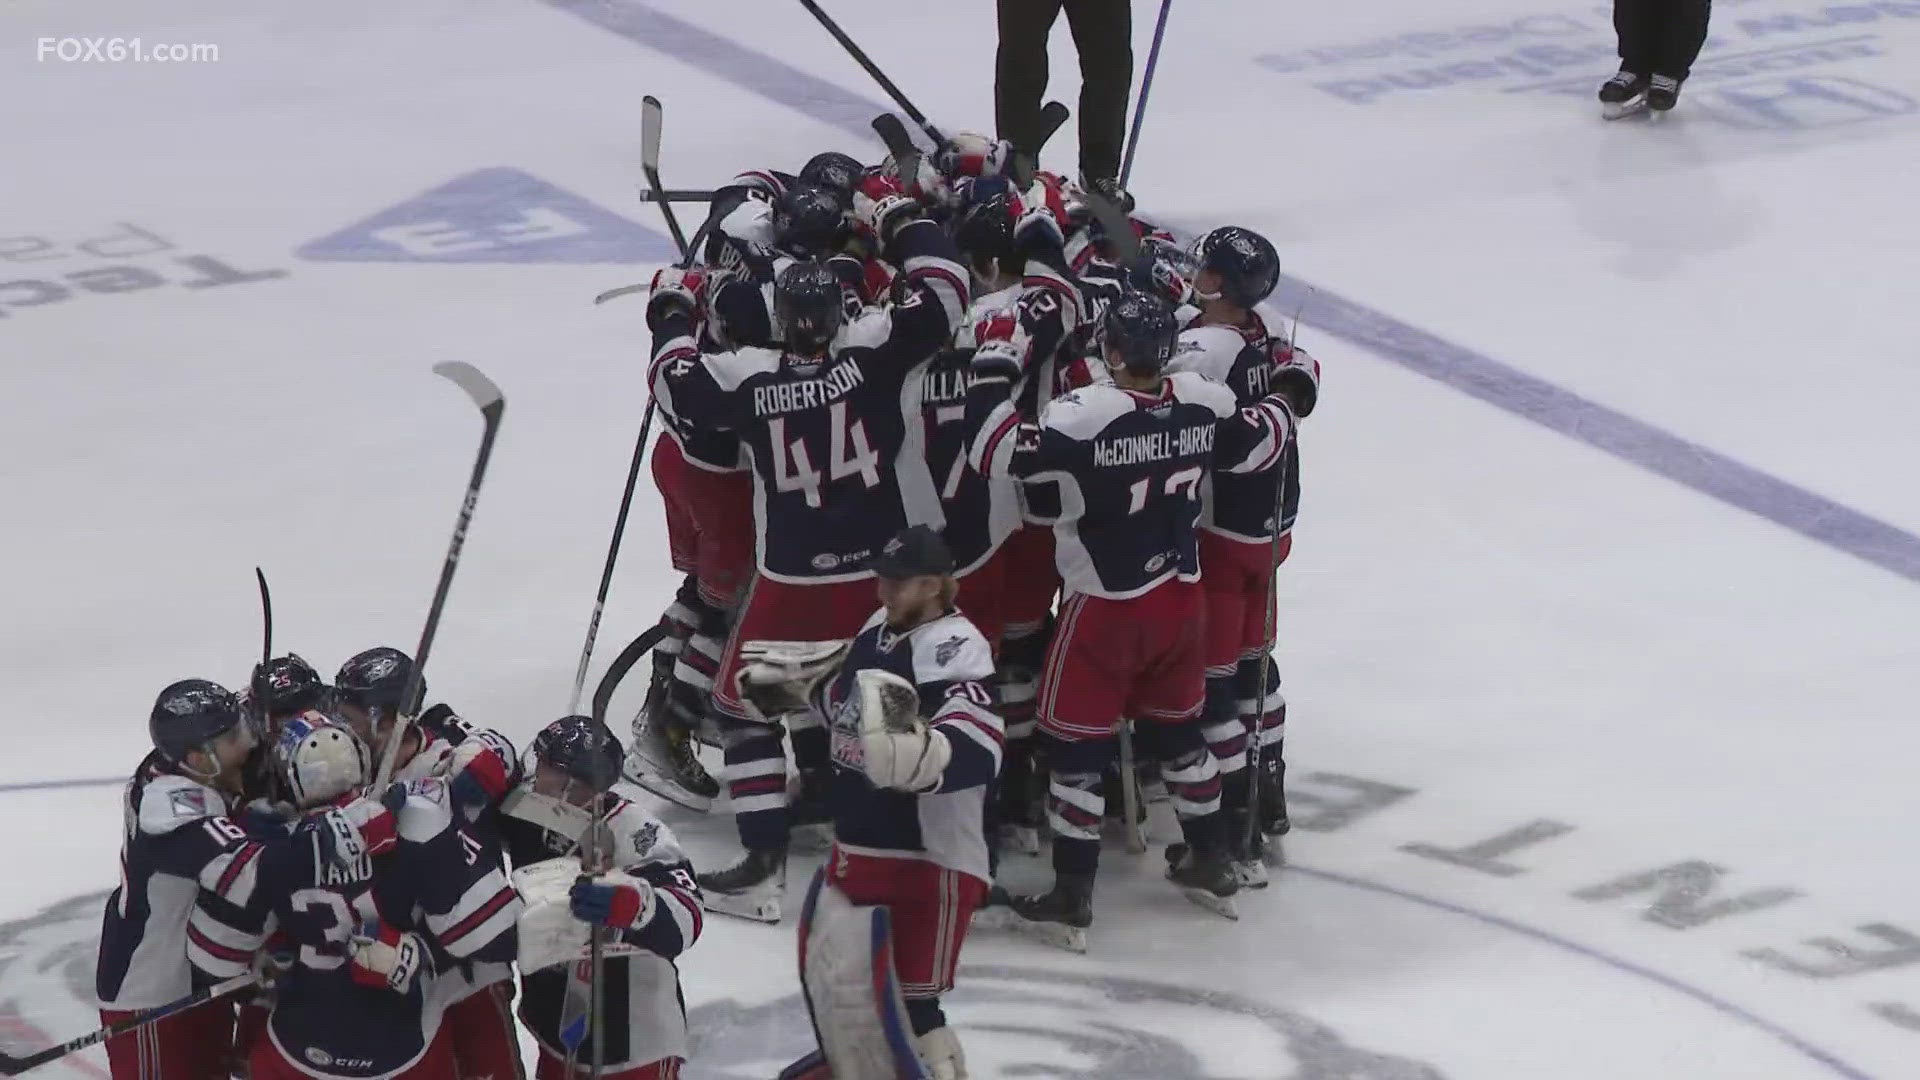 The Hartford Wolf Pack are headed to the Atlantic Division Finals for the second season in a row after they eliminated Providence on Friday night.